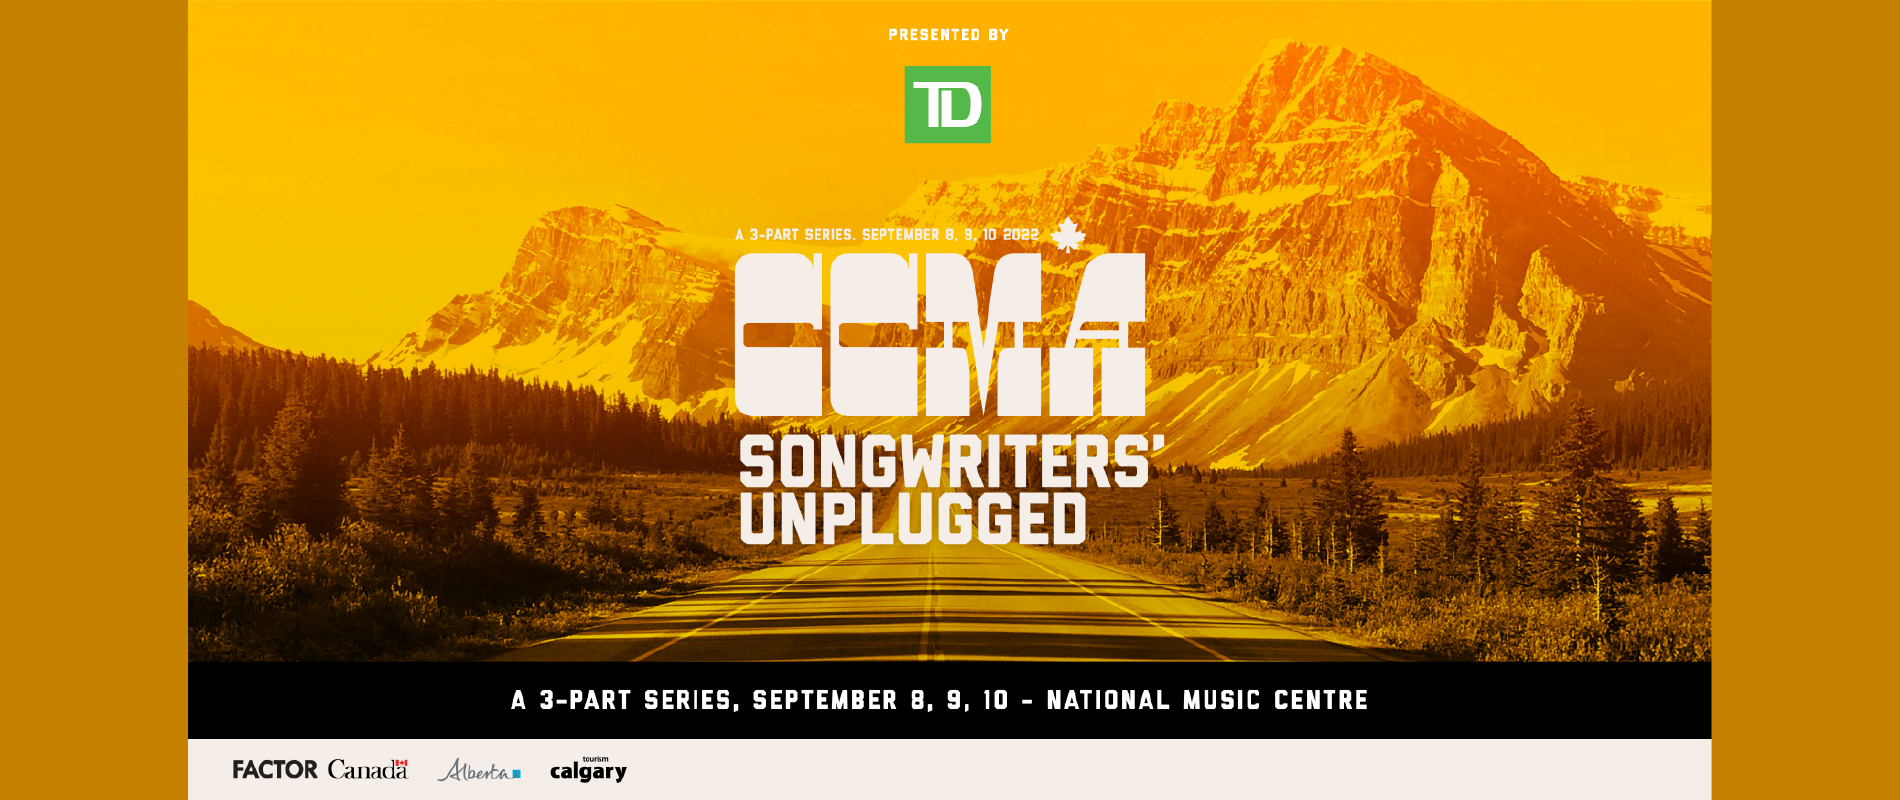 CCMA Songwriters' Unplugged Presented by TD: Session 3